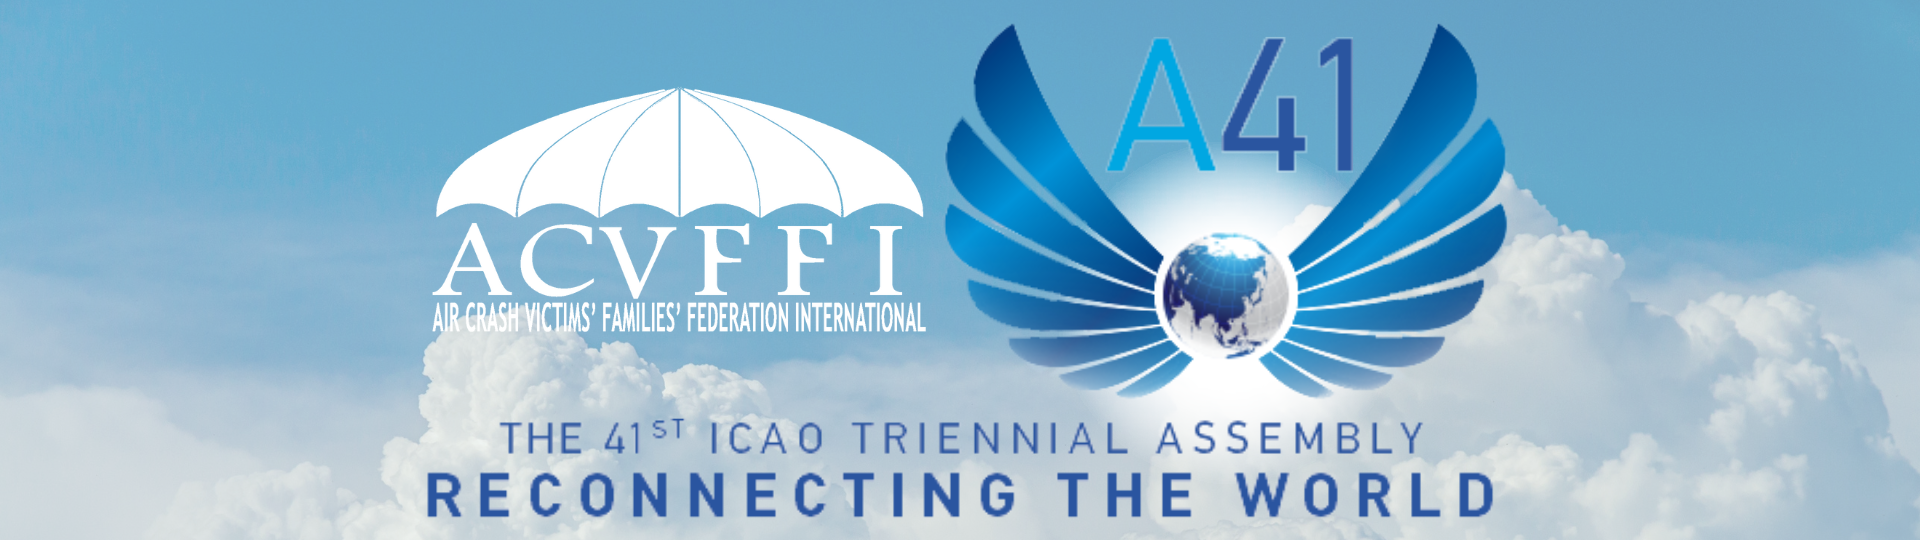 ACVFFI at 41st ICAO Assembly